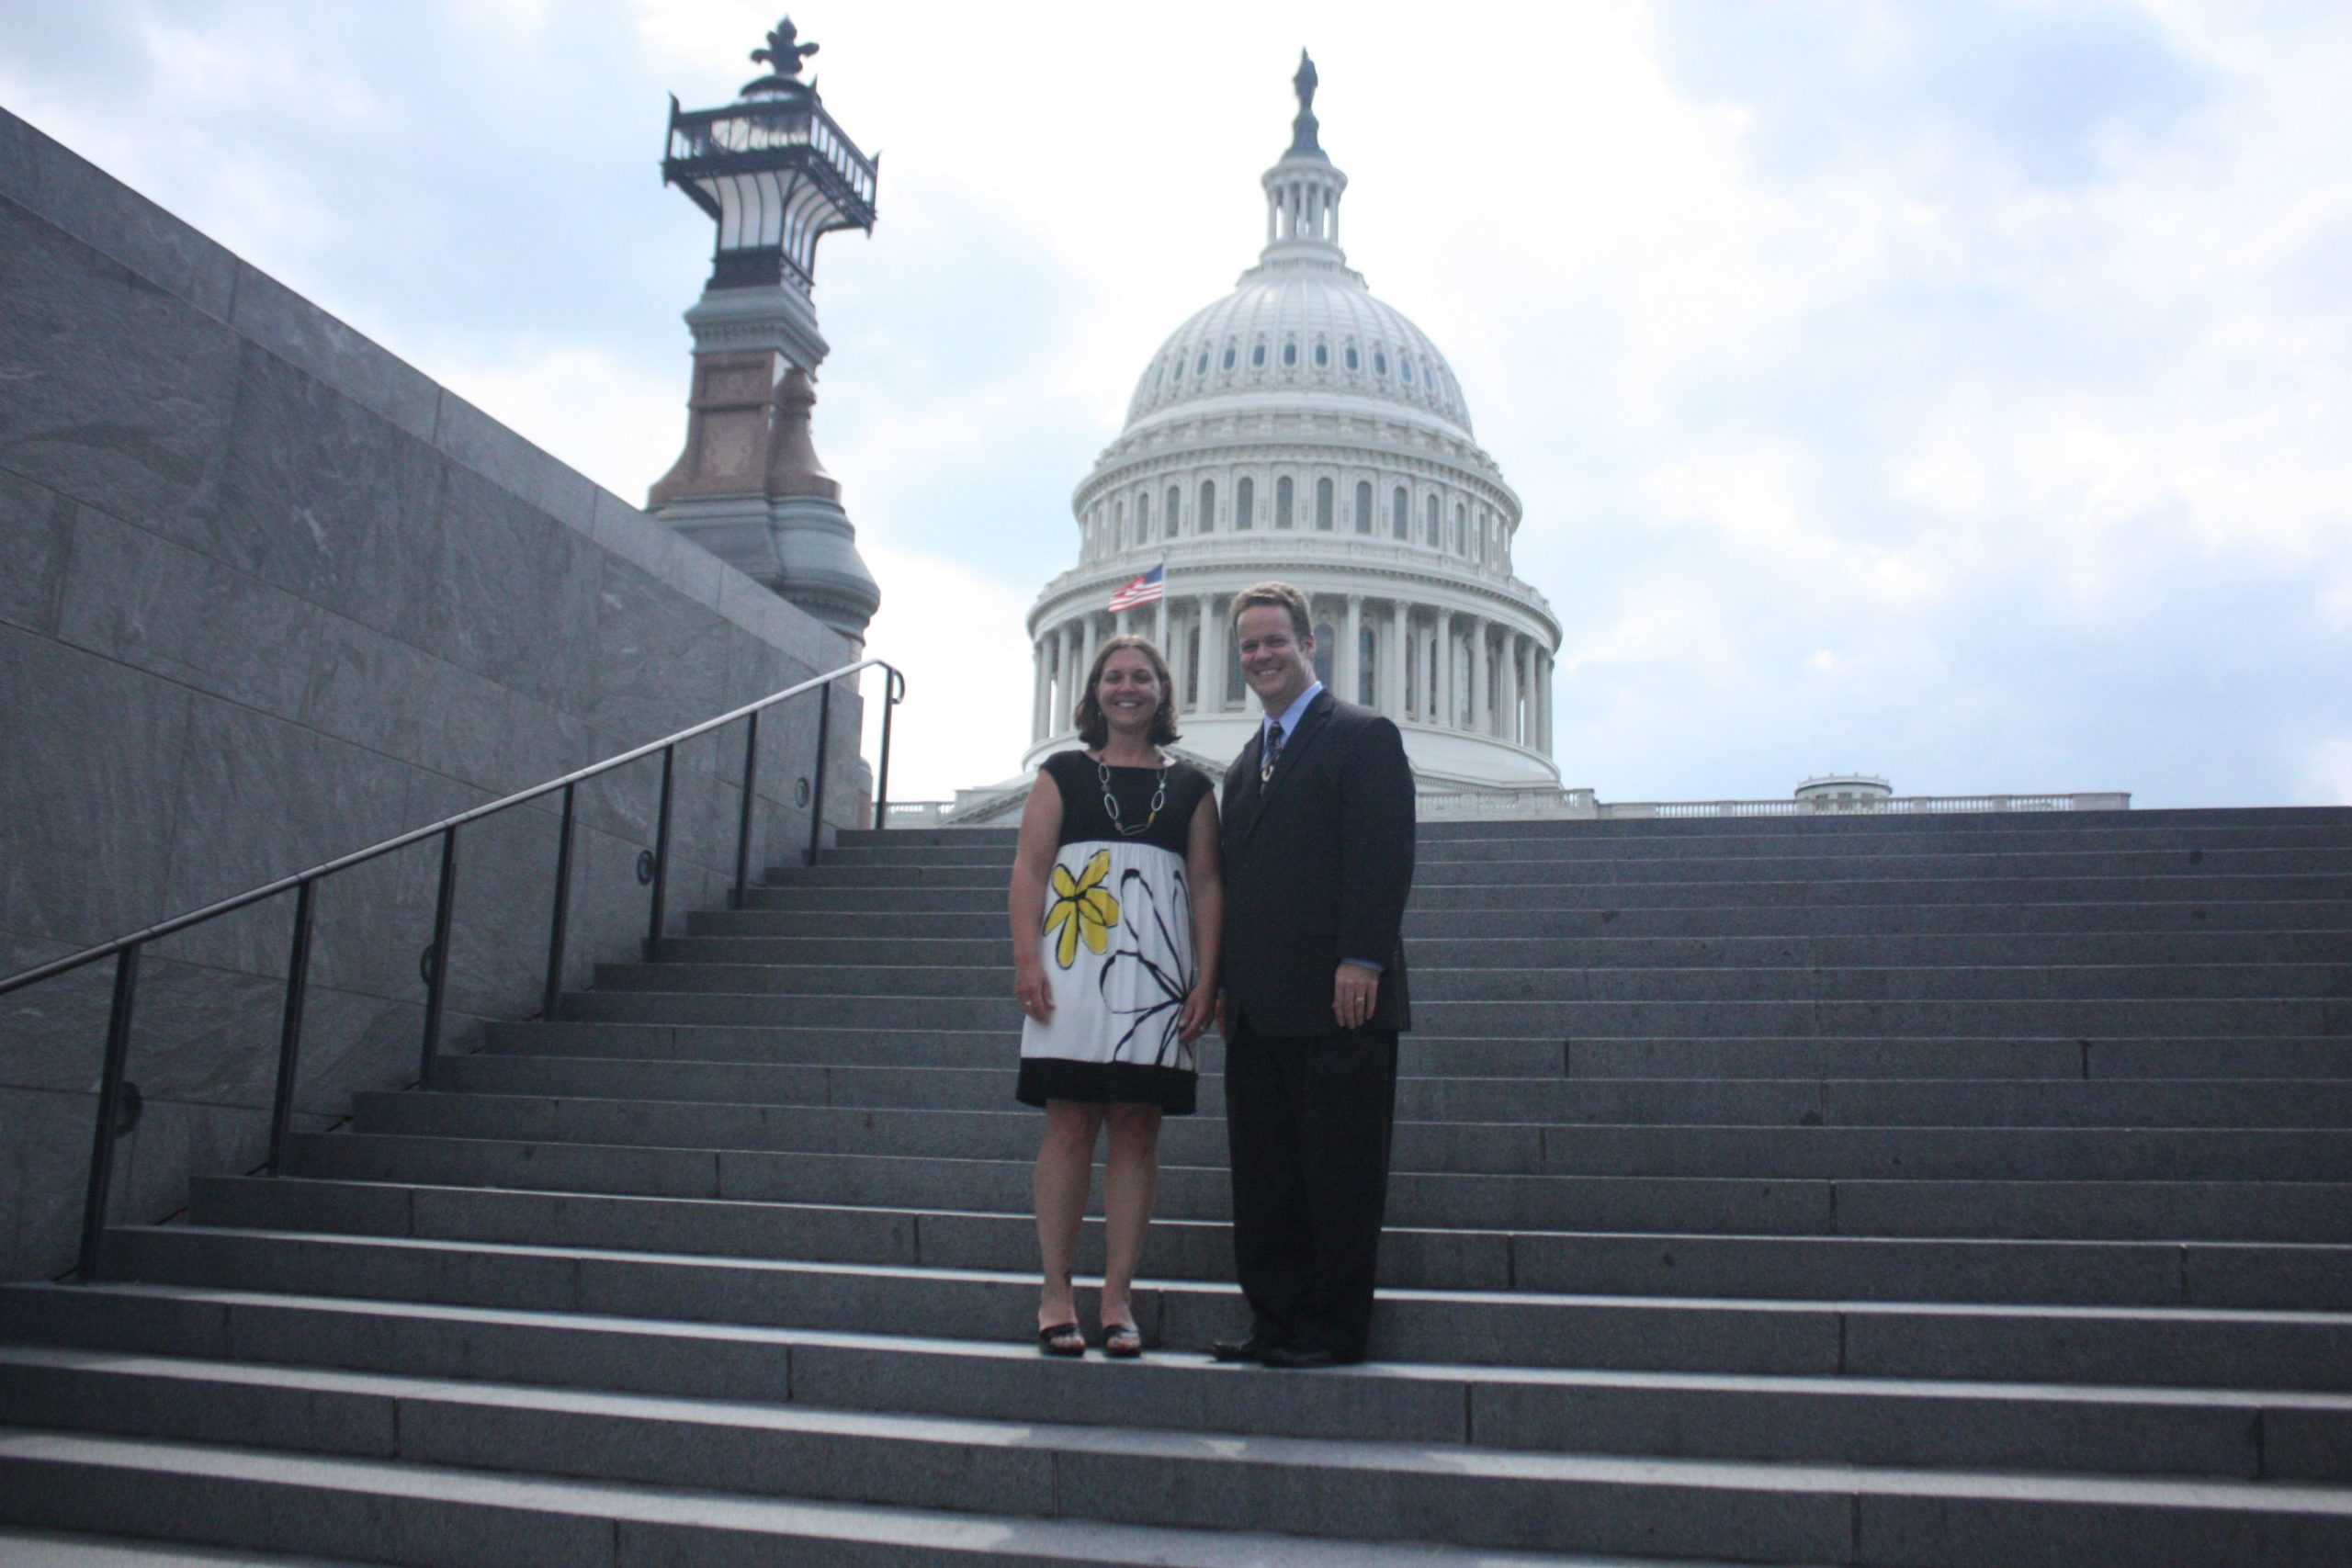 A man and a woman stand on the steps of the US Capitol.